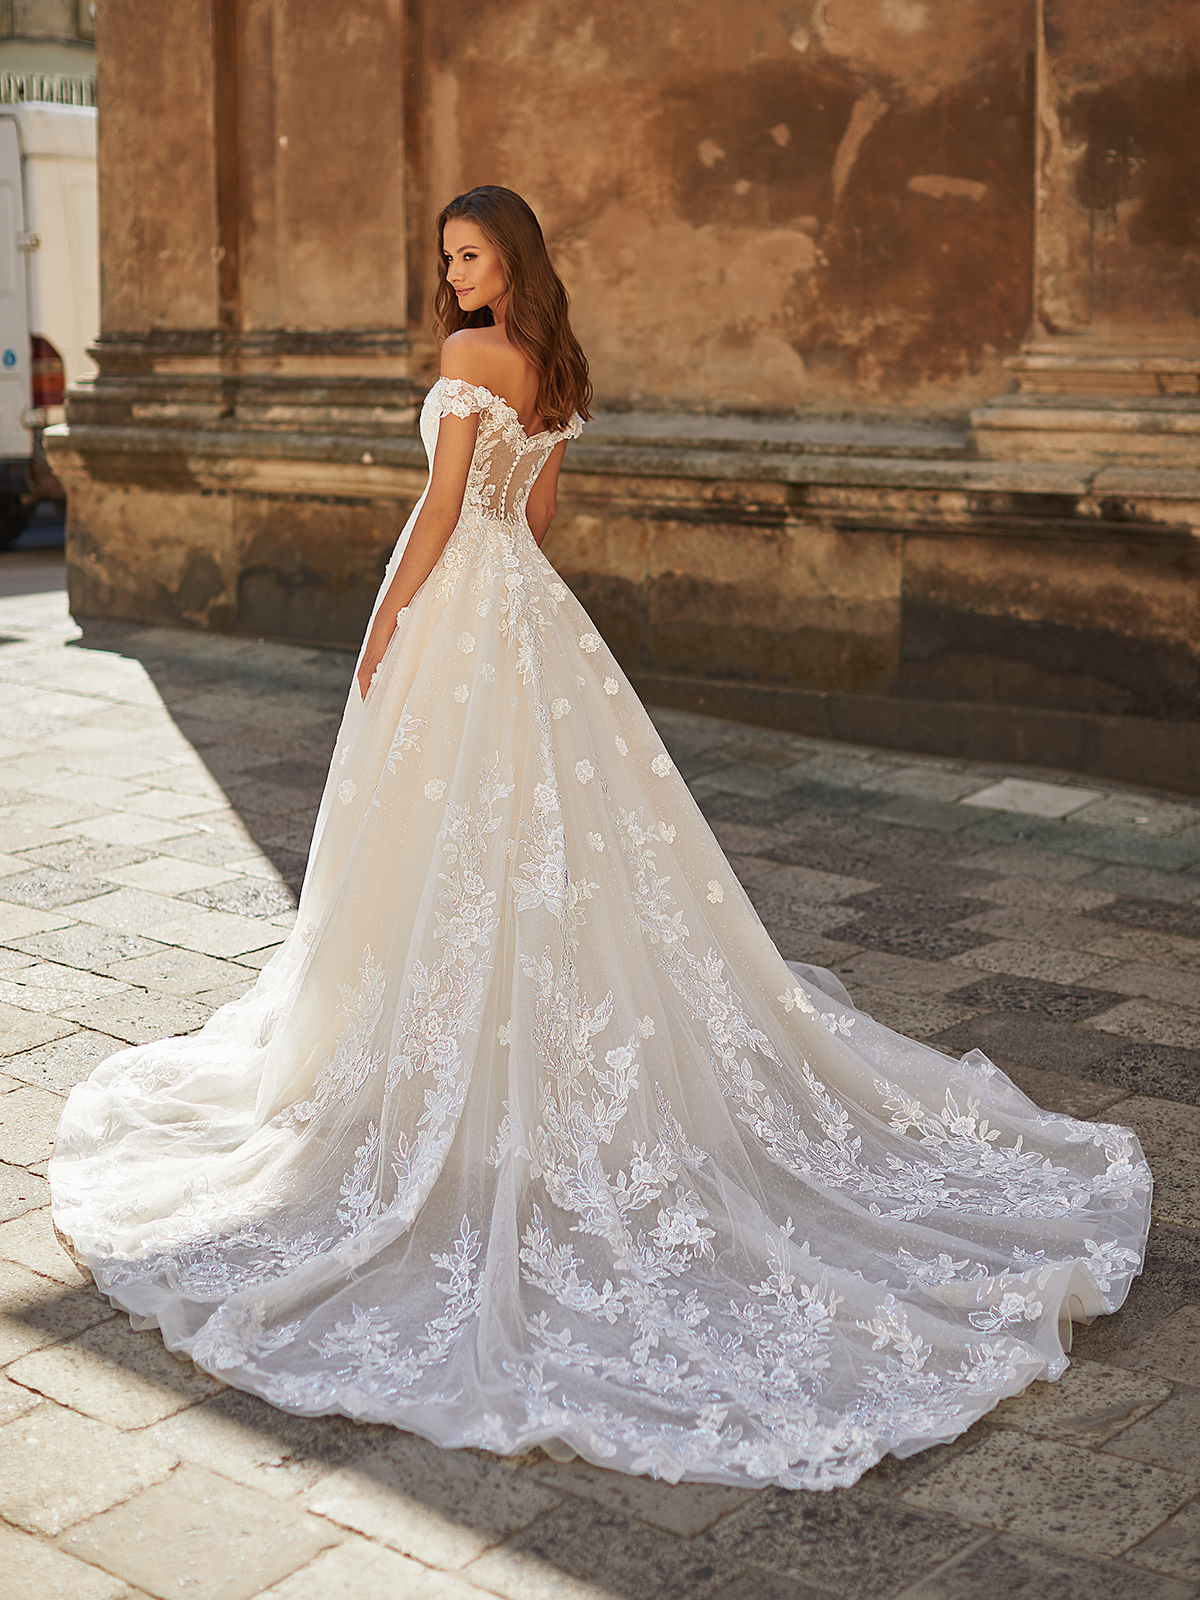 Wedding Dress Fabric Guide to Find the Perfect Style